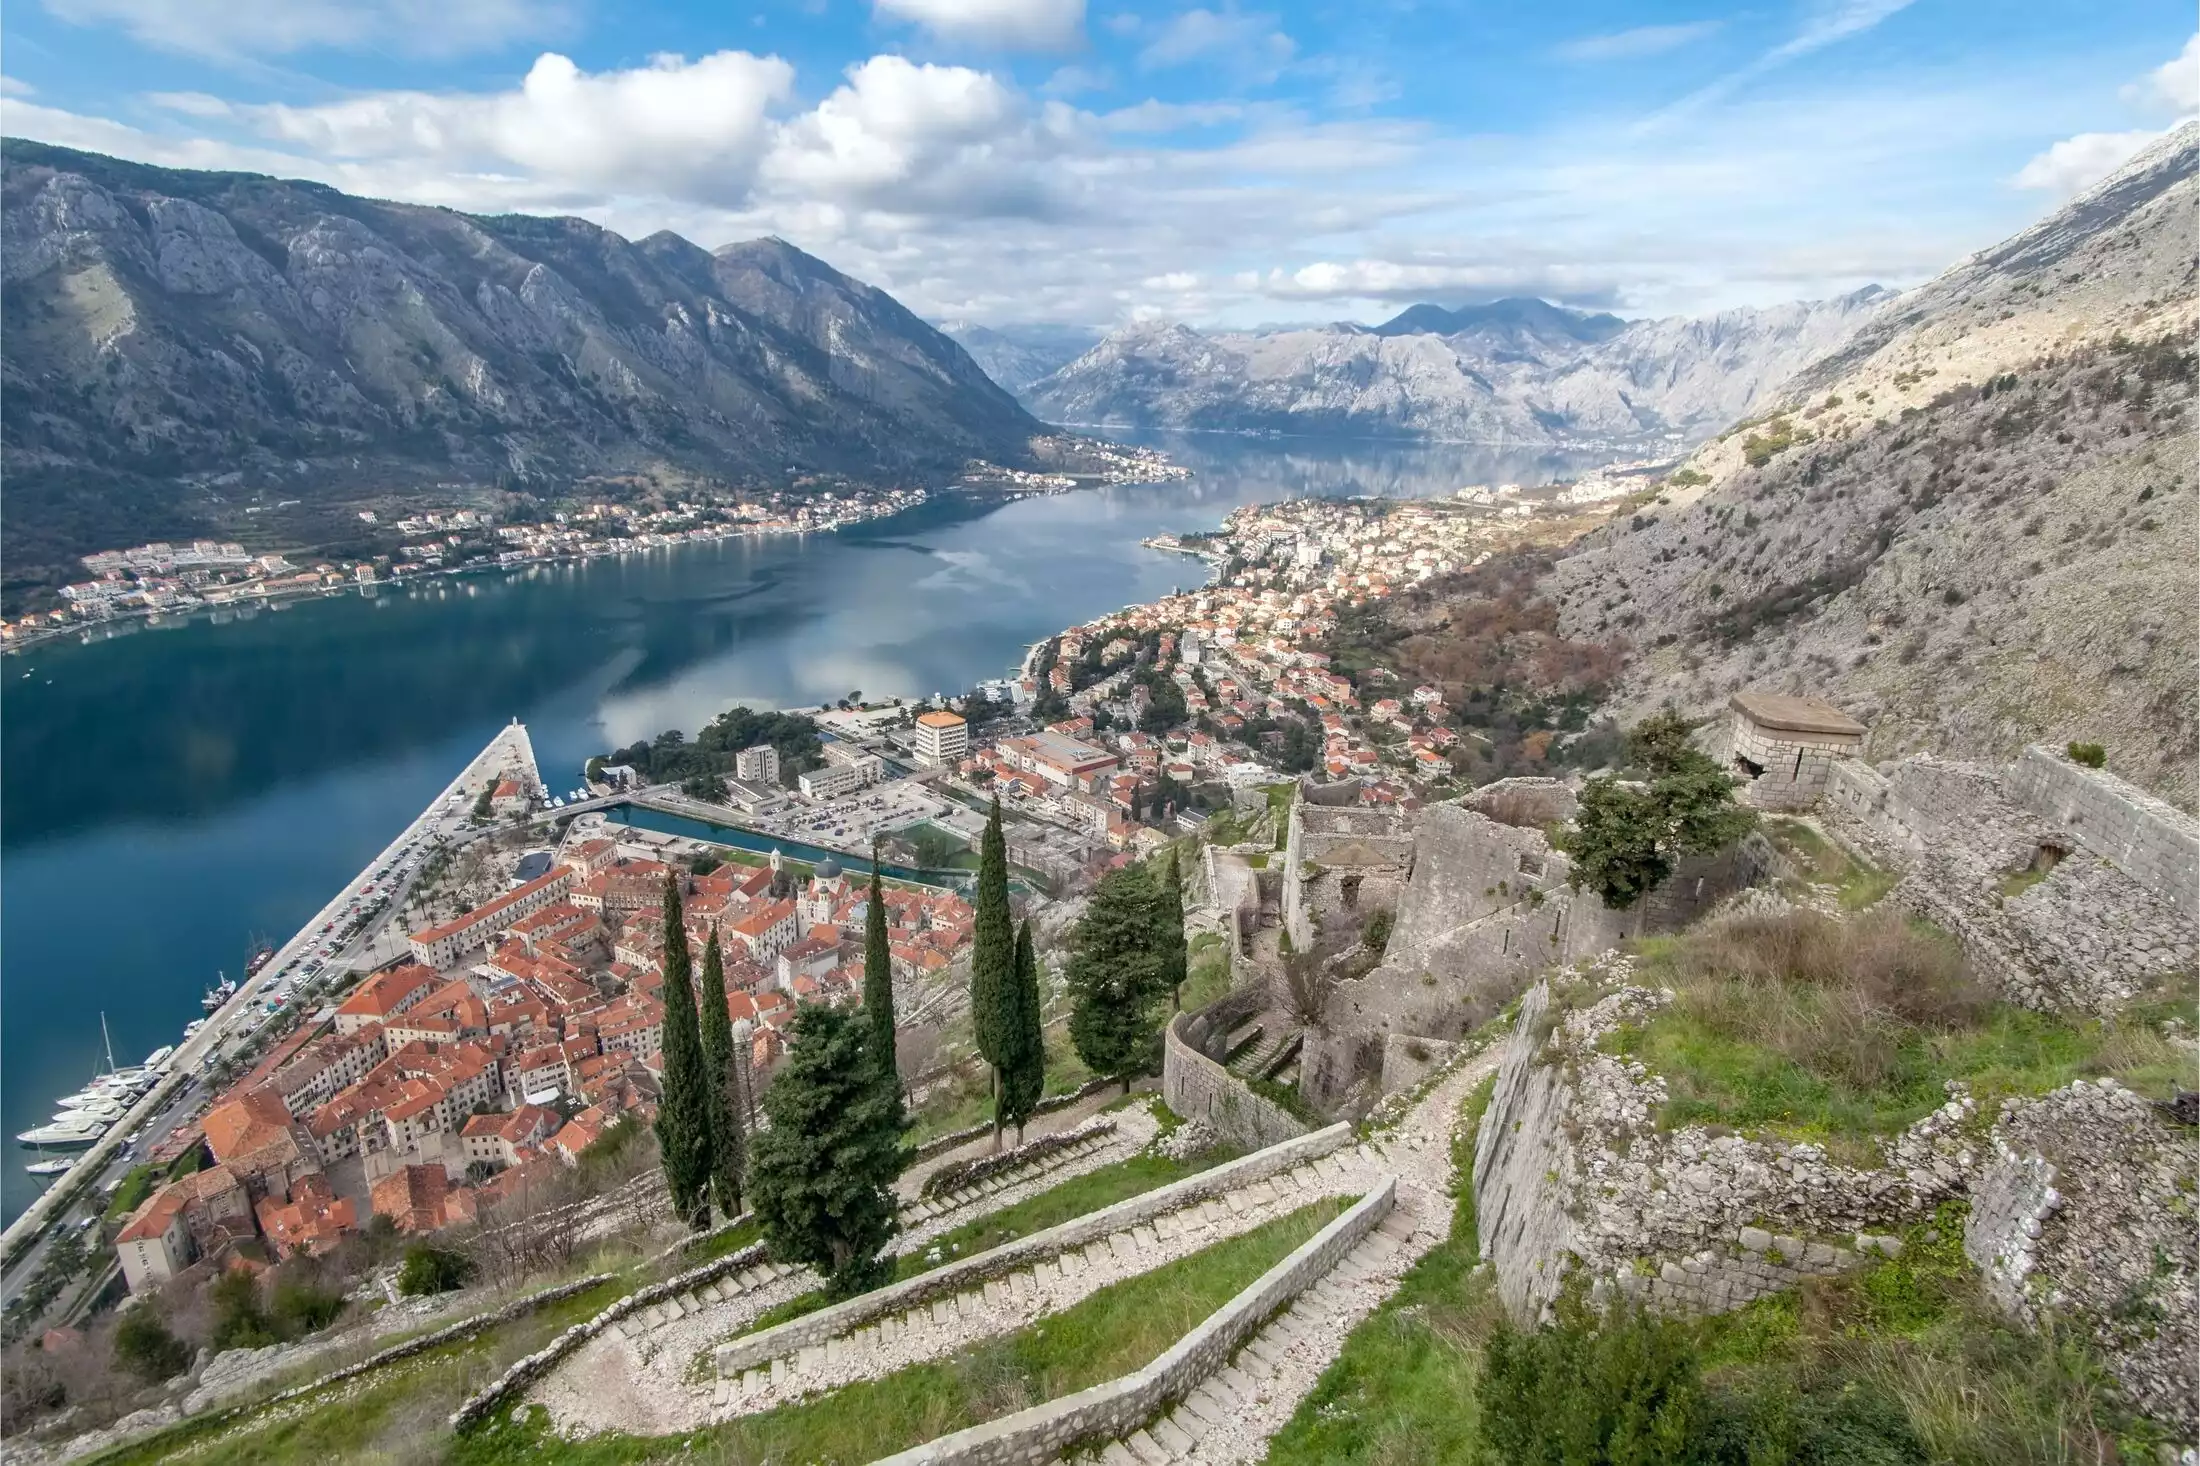 Holiday to Montenegro: Dreamy destination for nature lovers